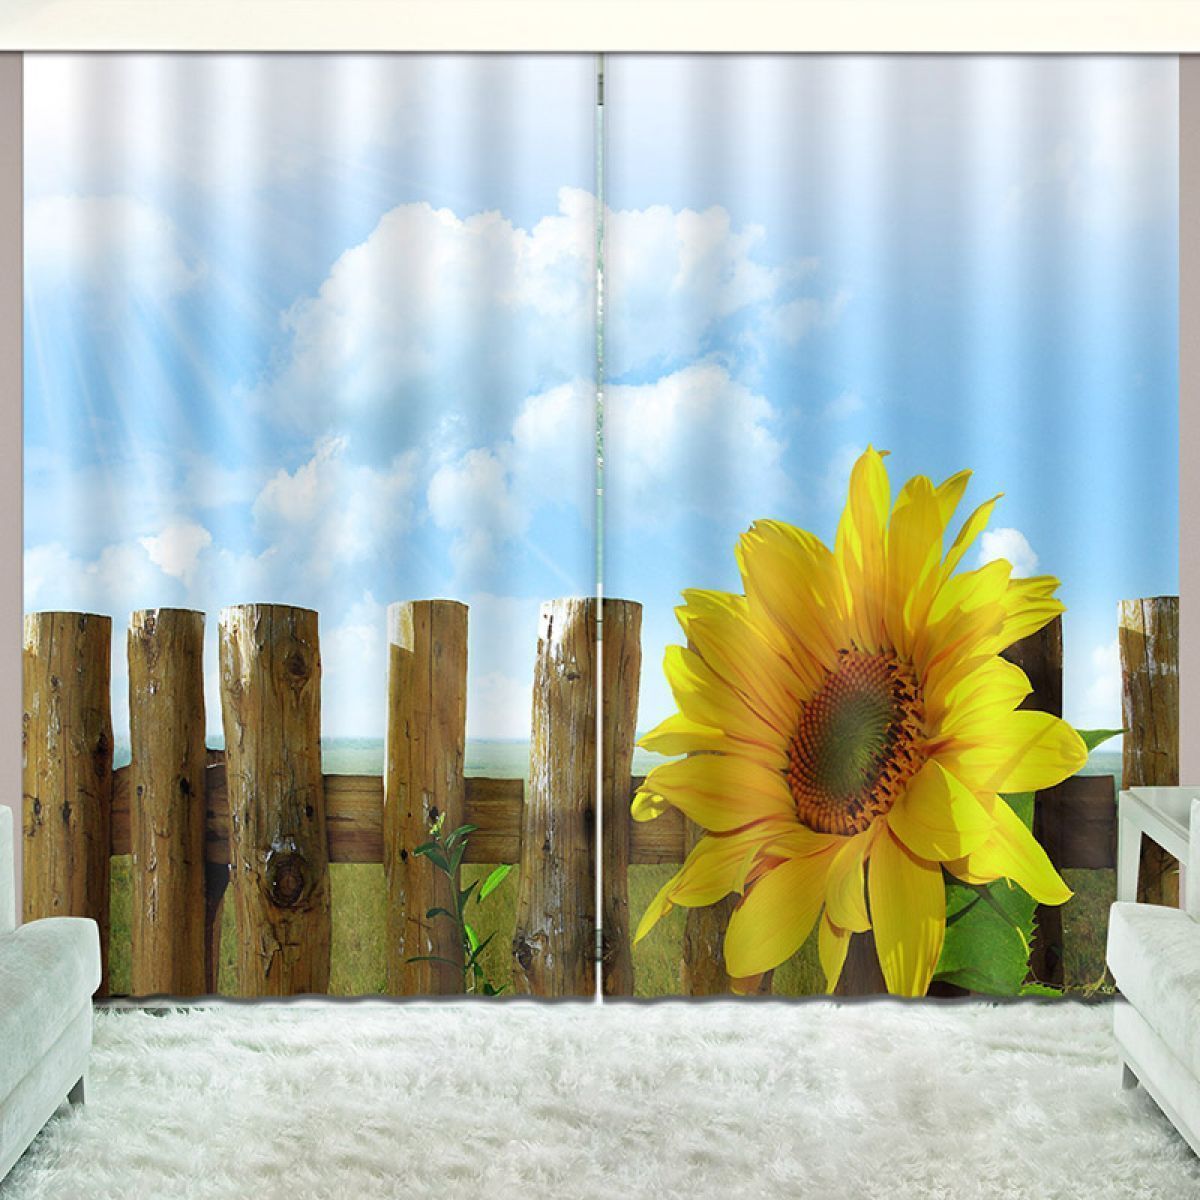 Fence And Sunflower Printed Window Curtain Home Decor